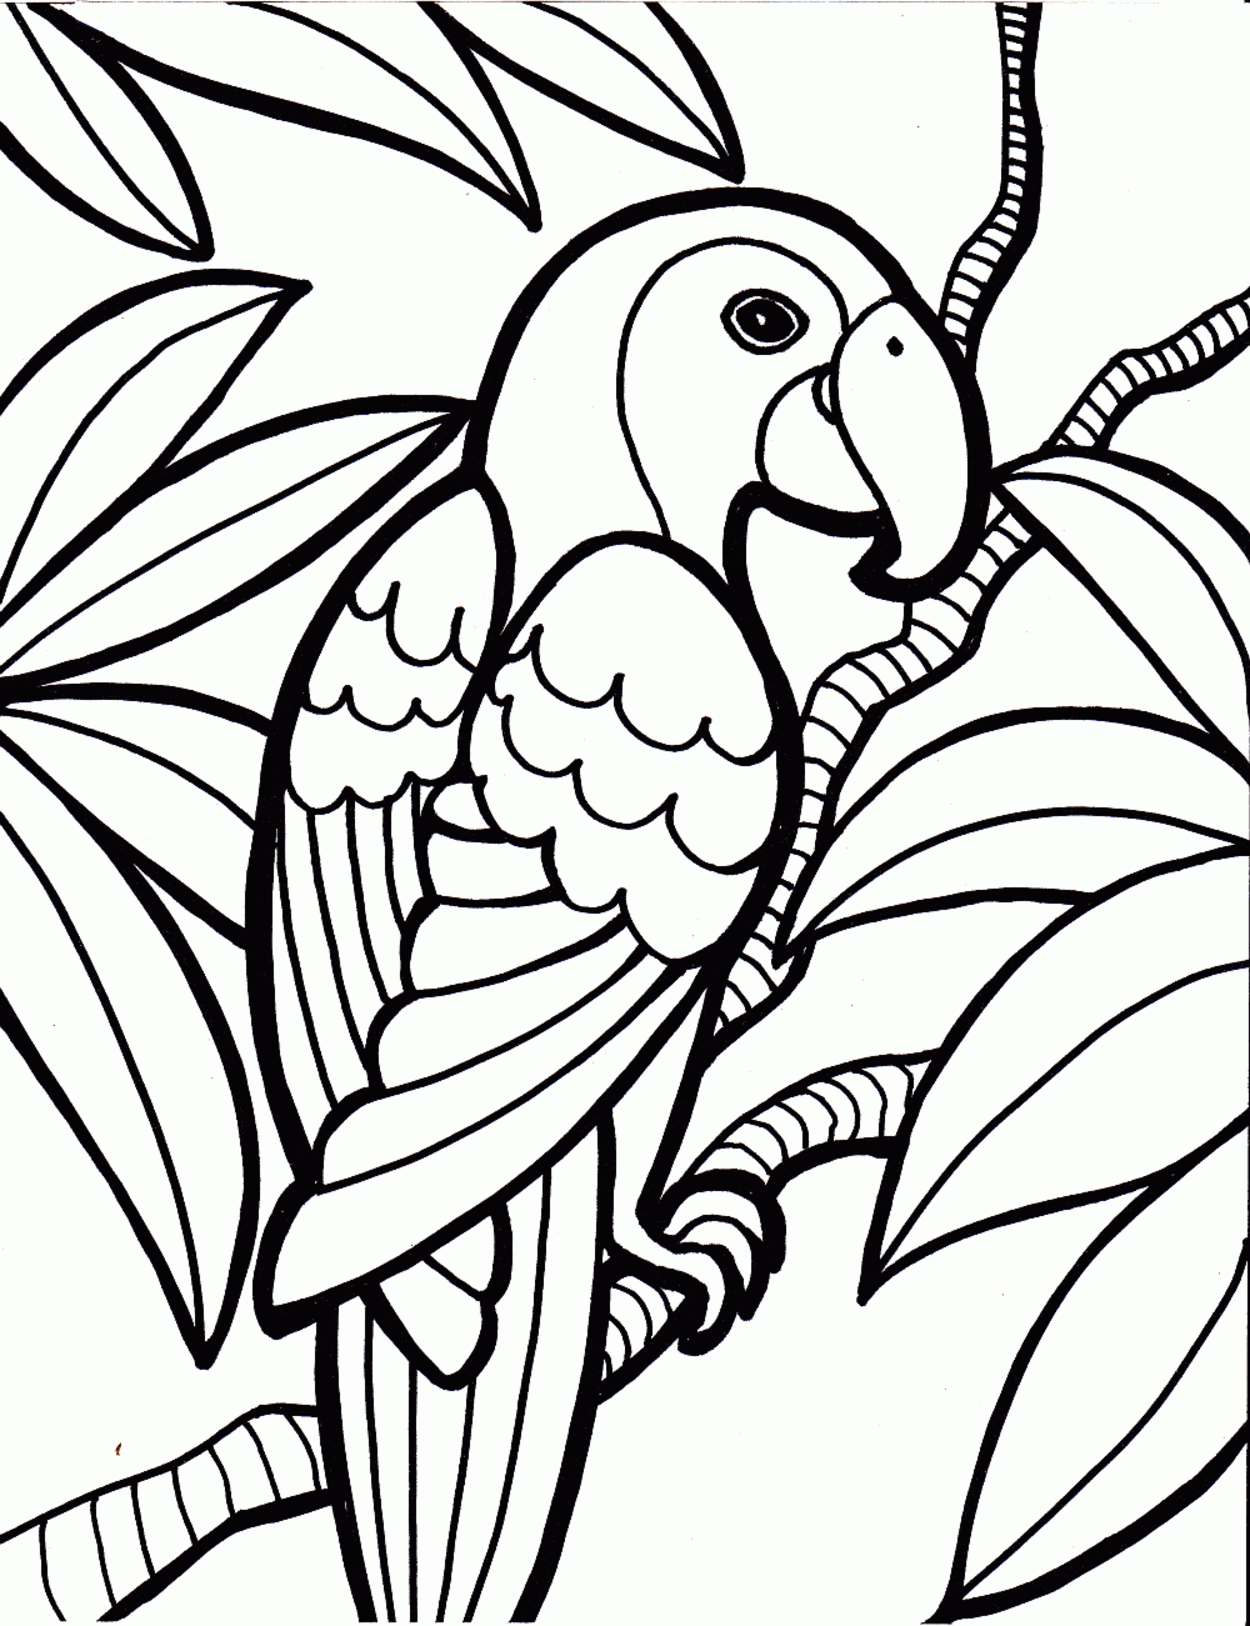 Rainforest coloring #1, Download drawings